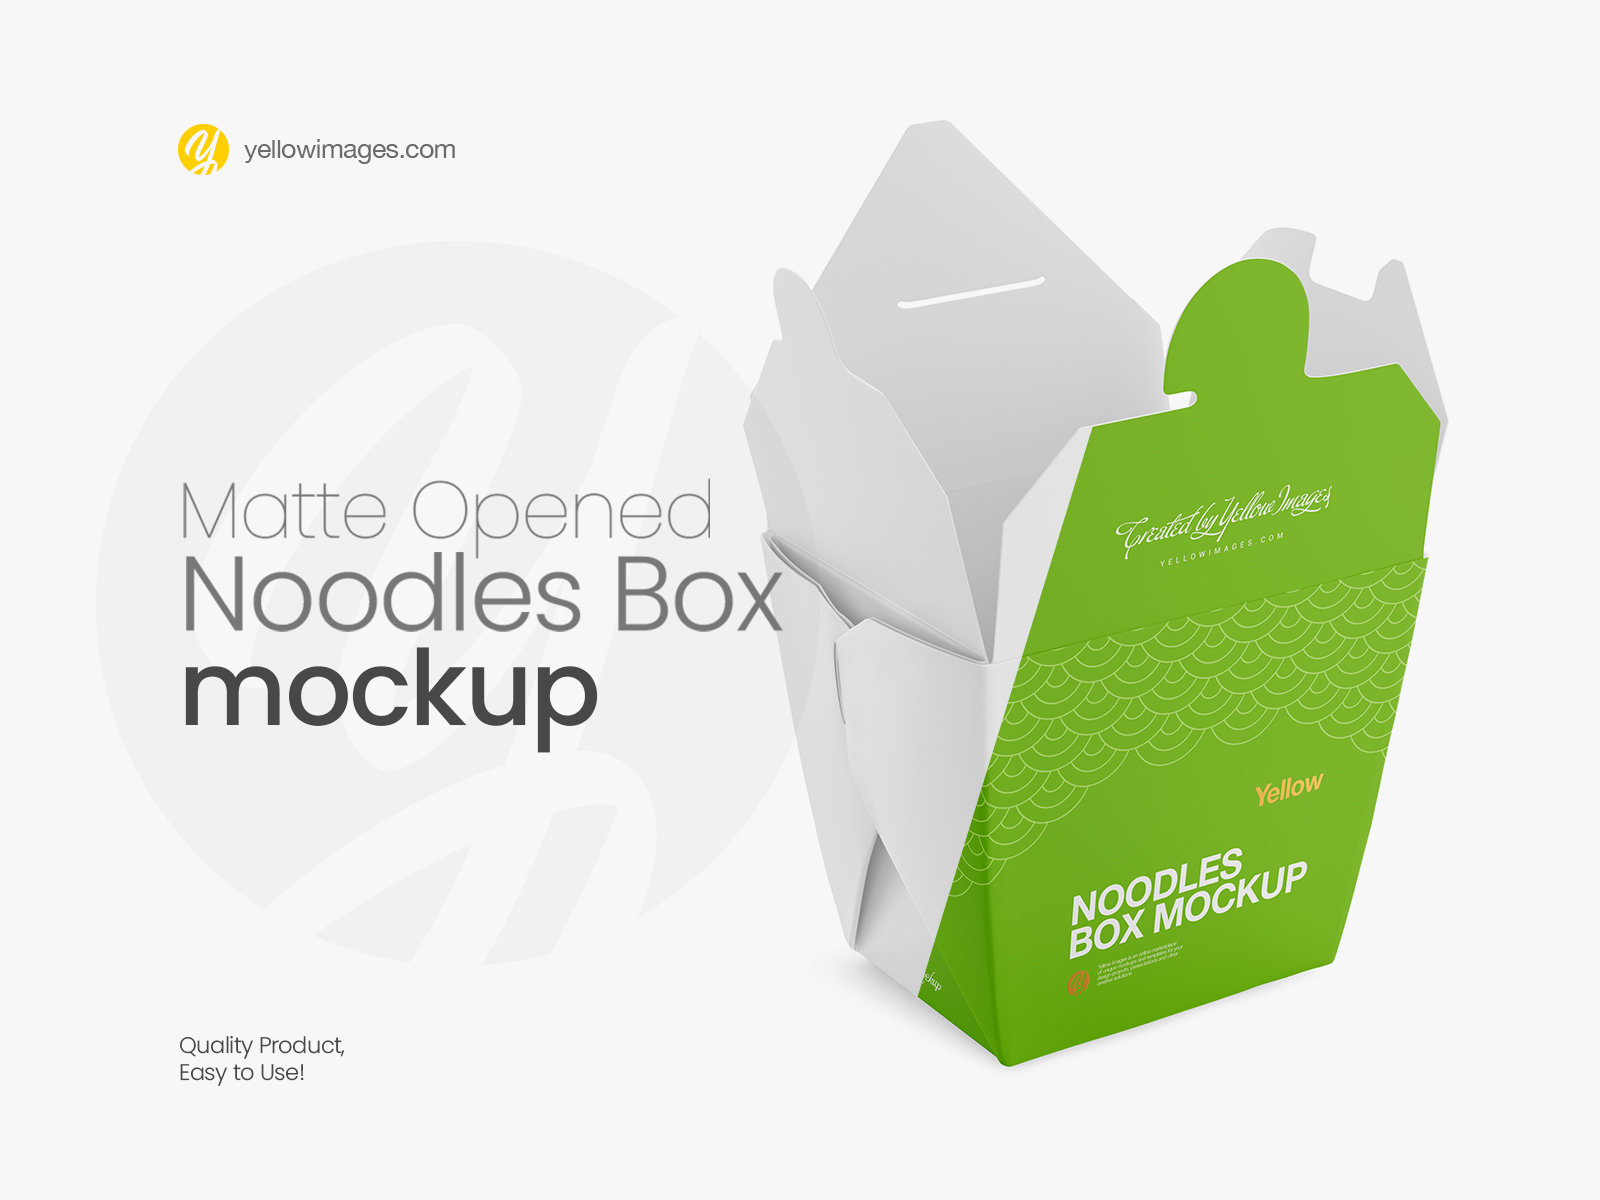 Download Opened Matte Noodles Box Mockup Halfside View By Dmytro Ovcharenko On Dribbble PSD Mockup Templates